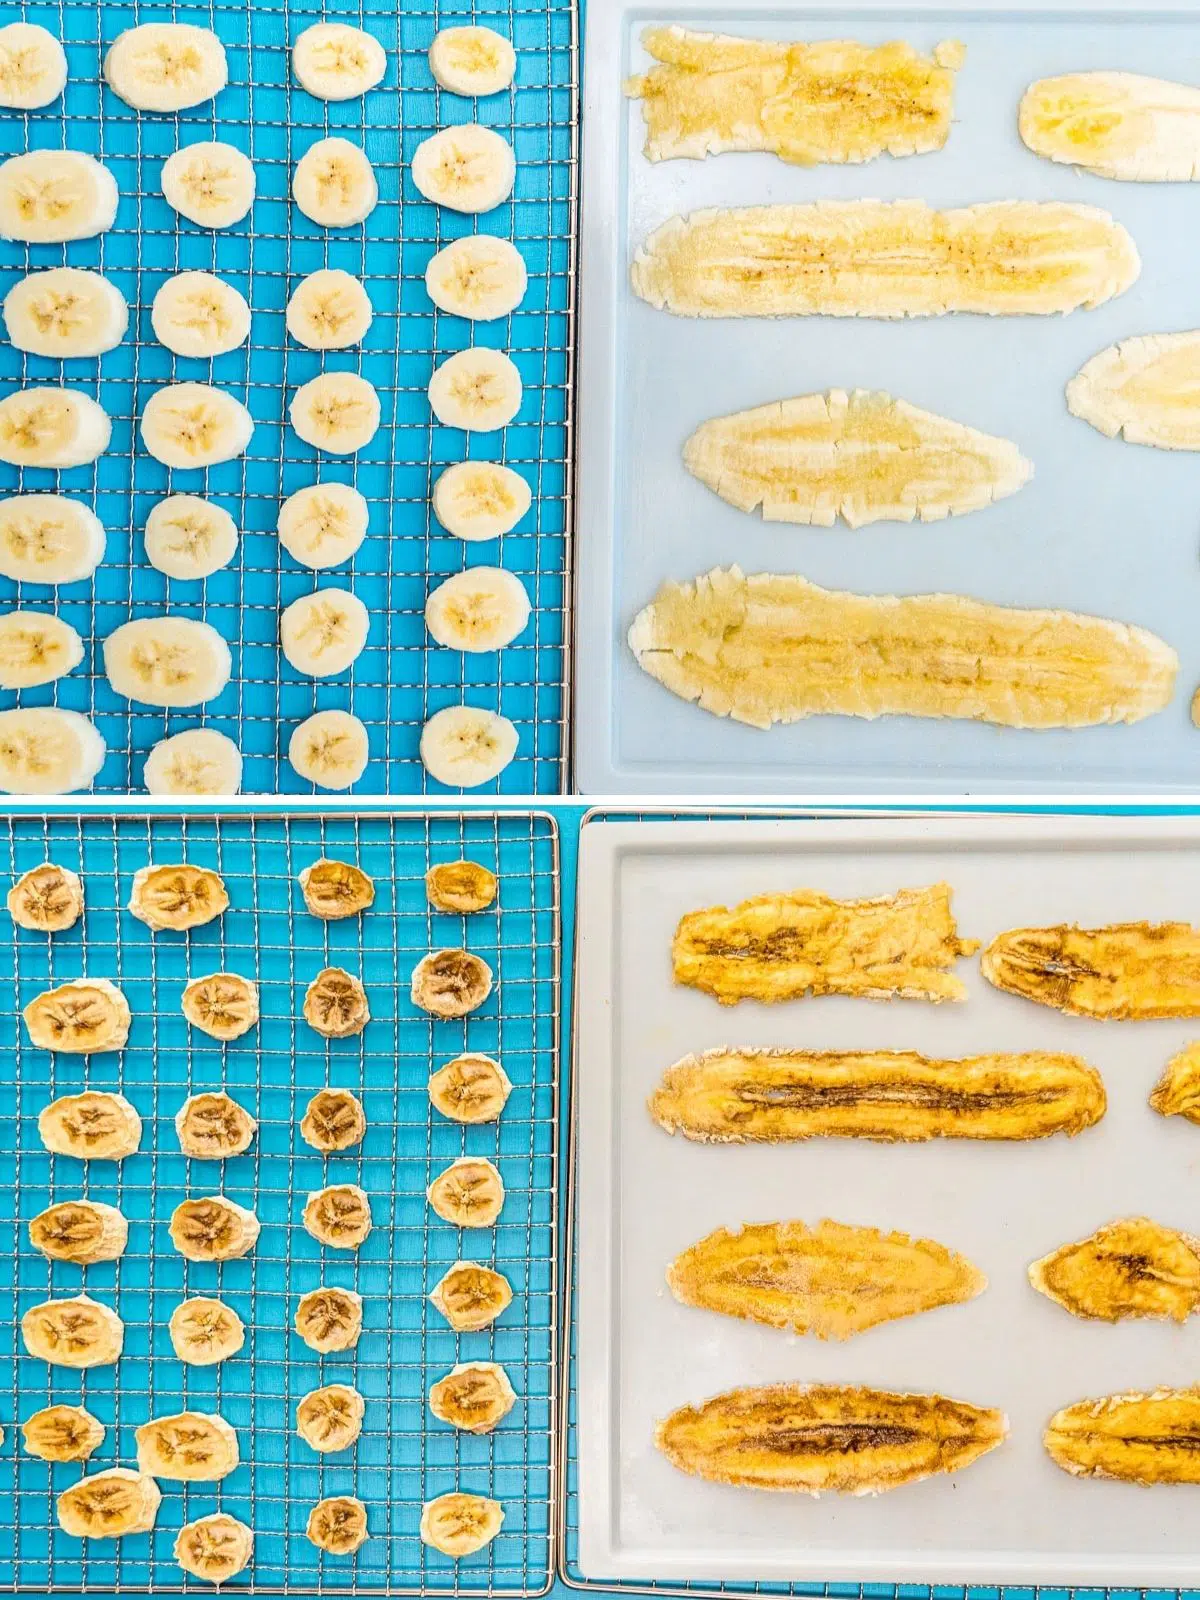 Bananas before and after dehydrating